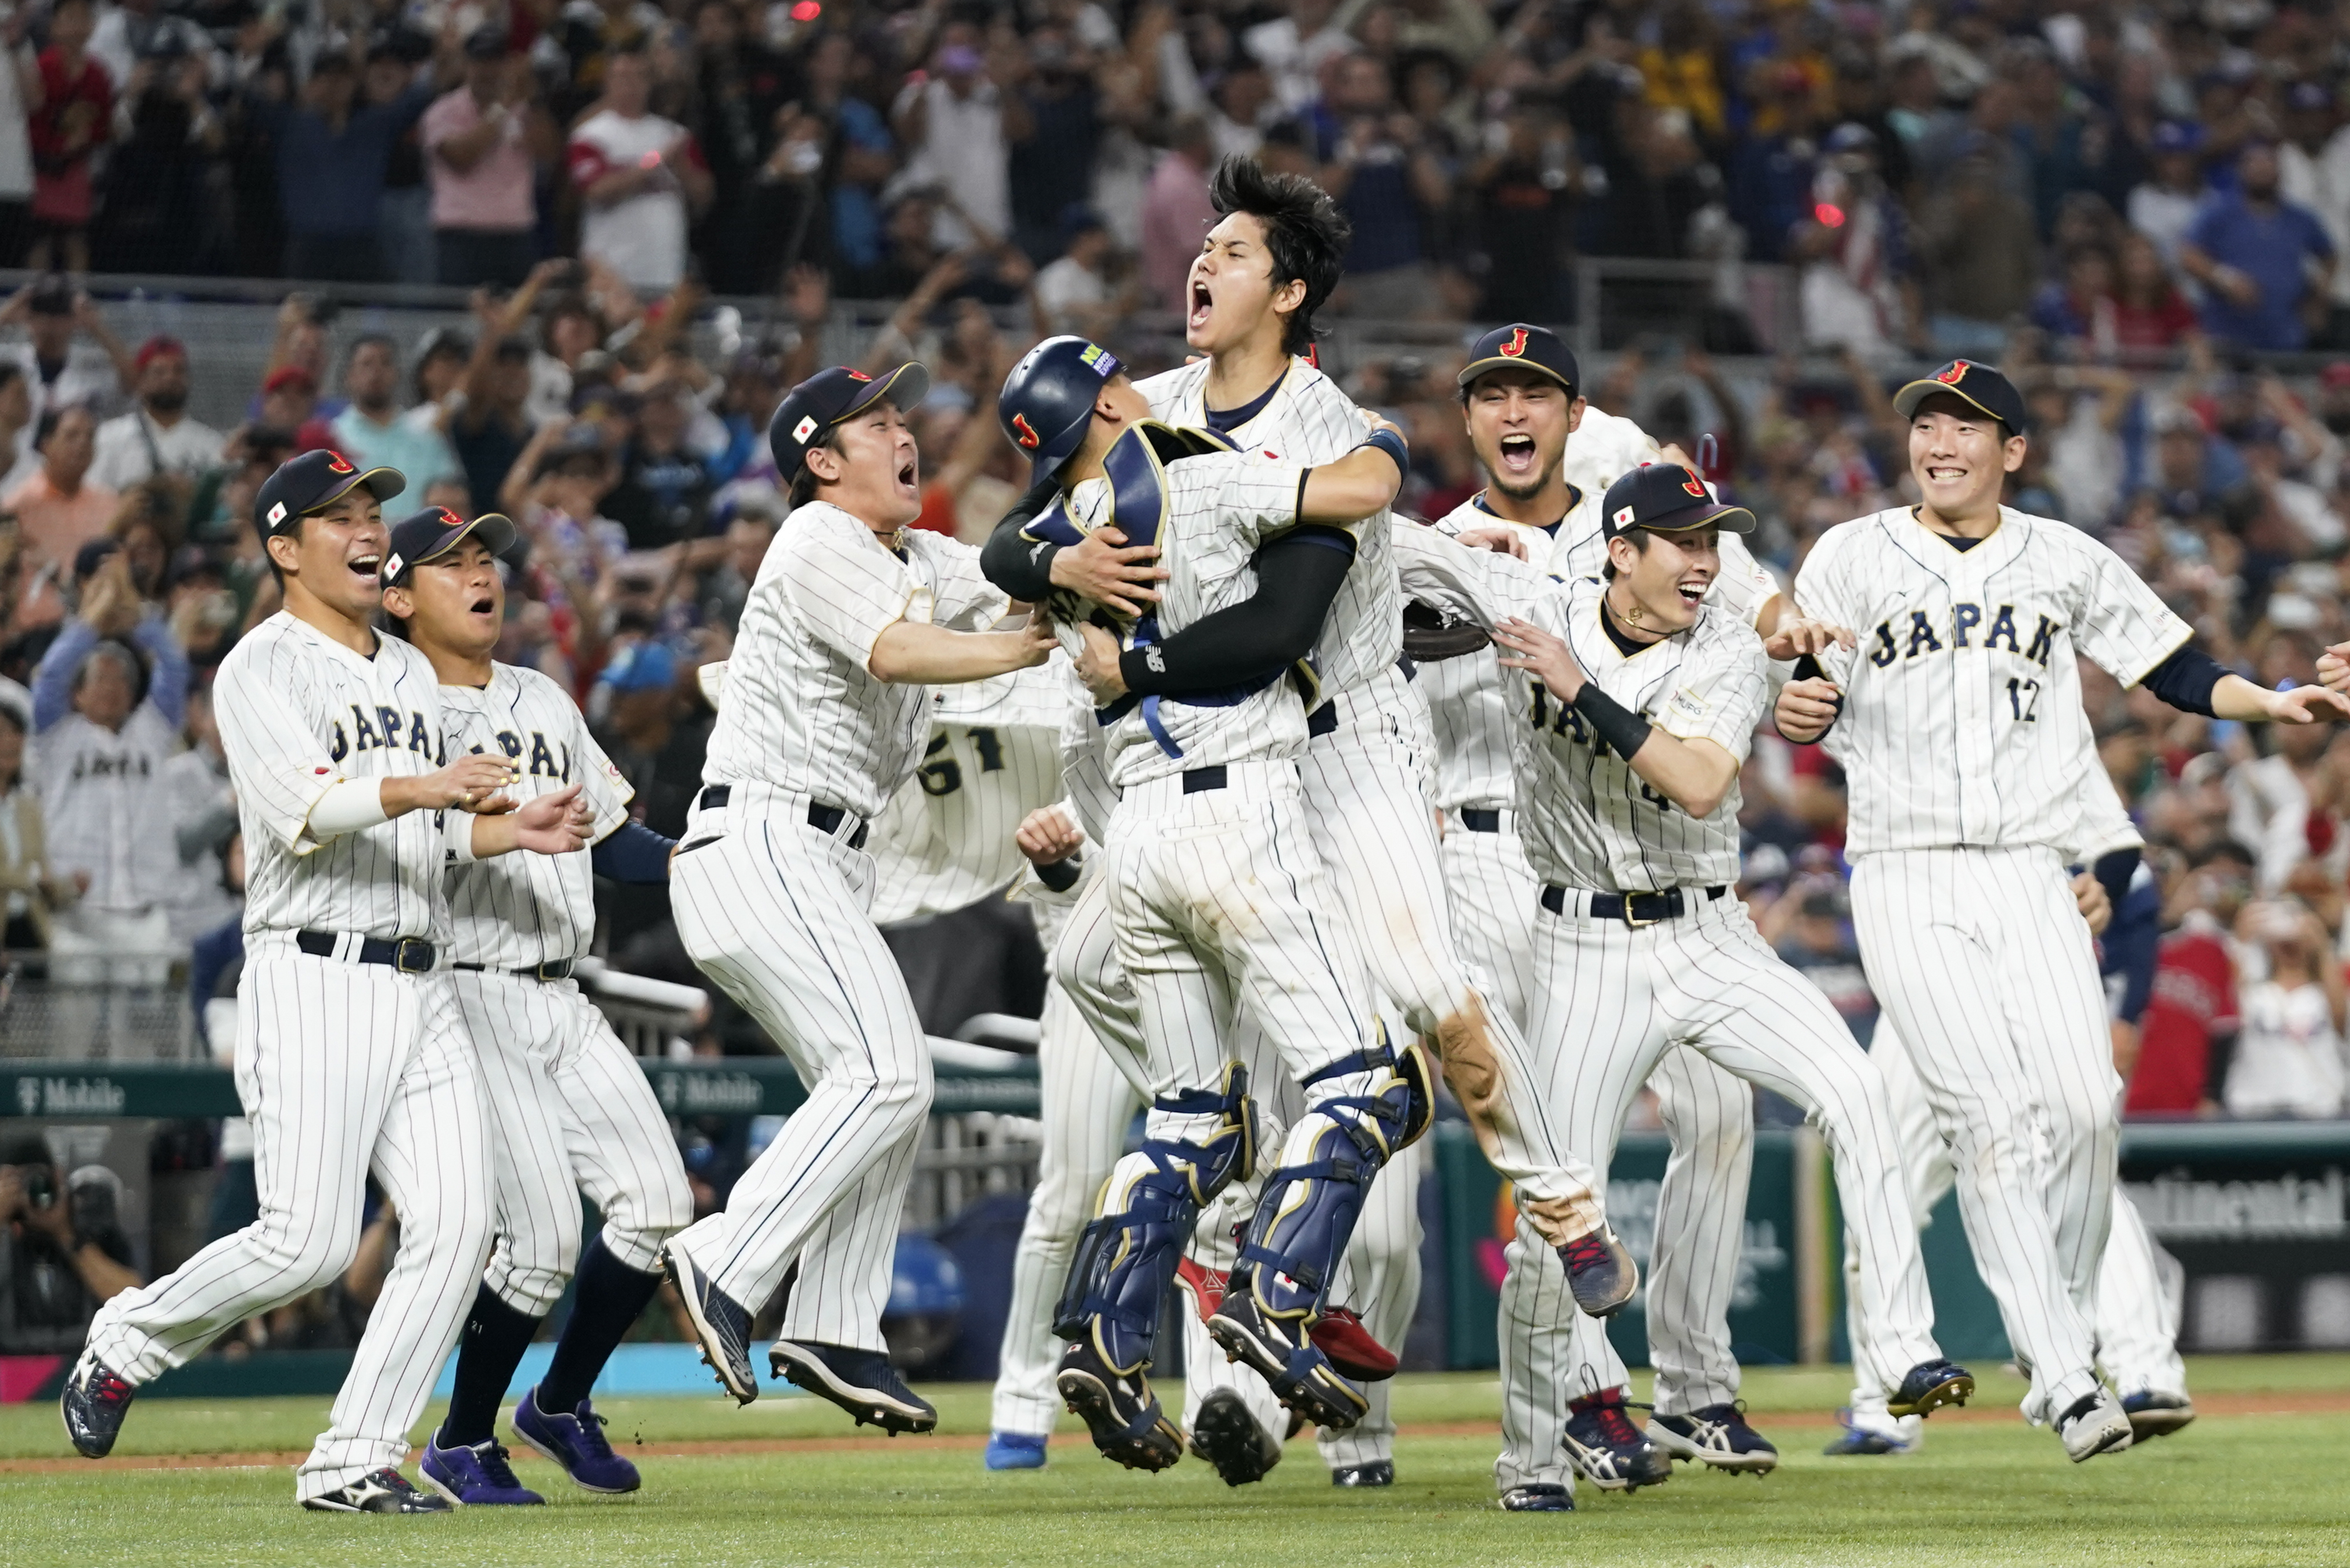 Shohei Ohtani strikes out Mike Trout to close out Japan's win over USA in World  Baseball Classic